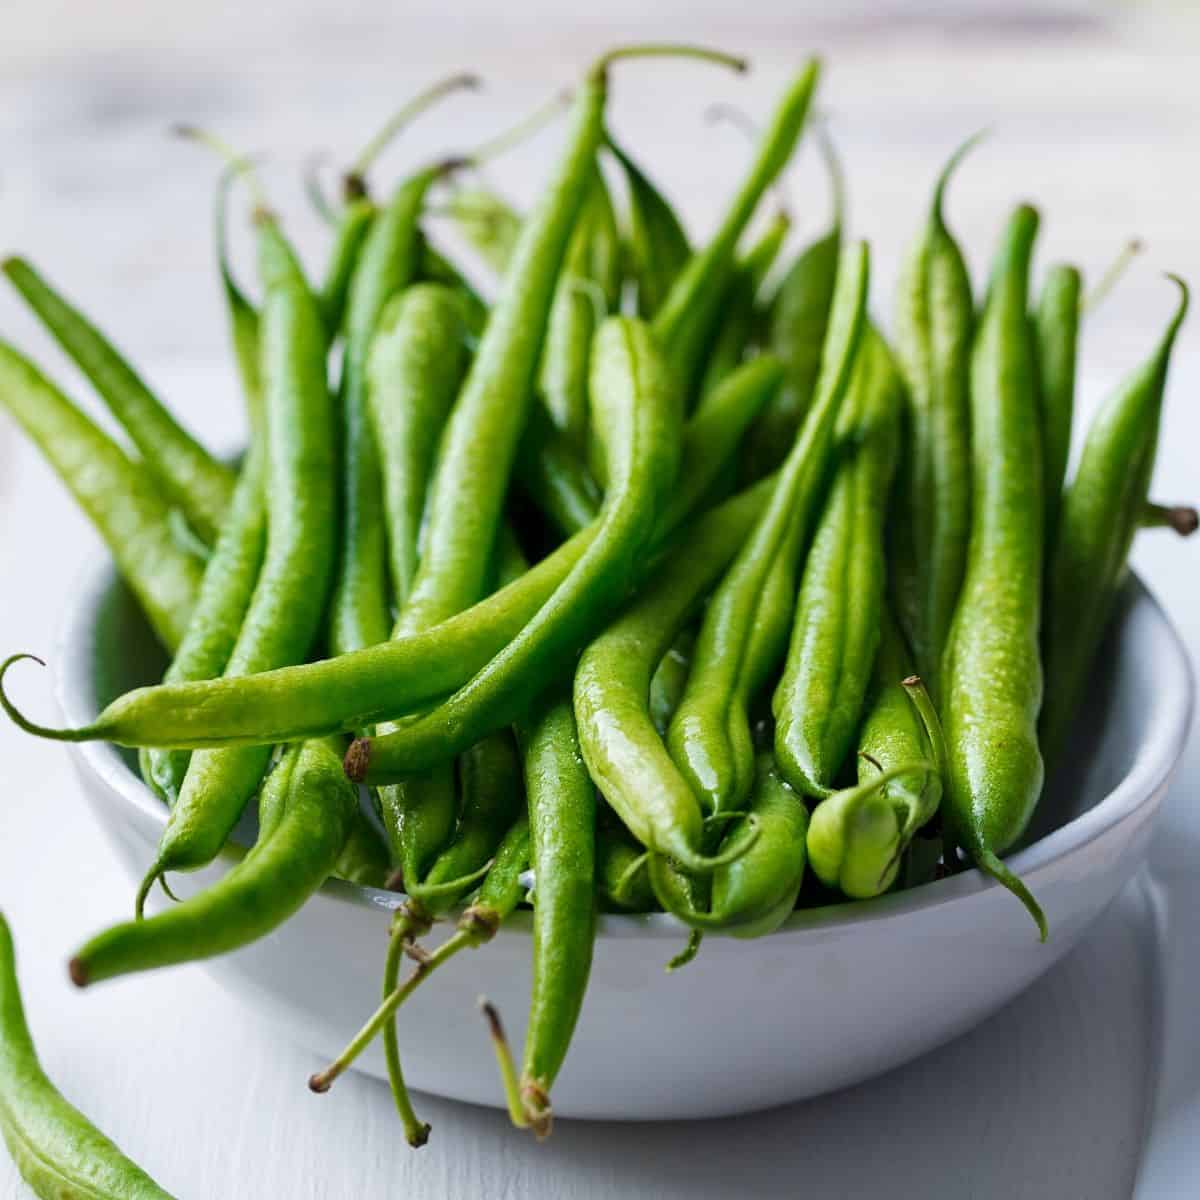 How to Freeze Green Beans (Blanching or No Blanching)